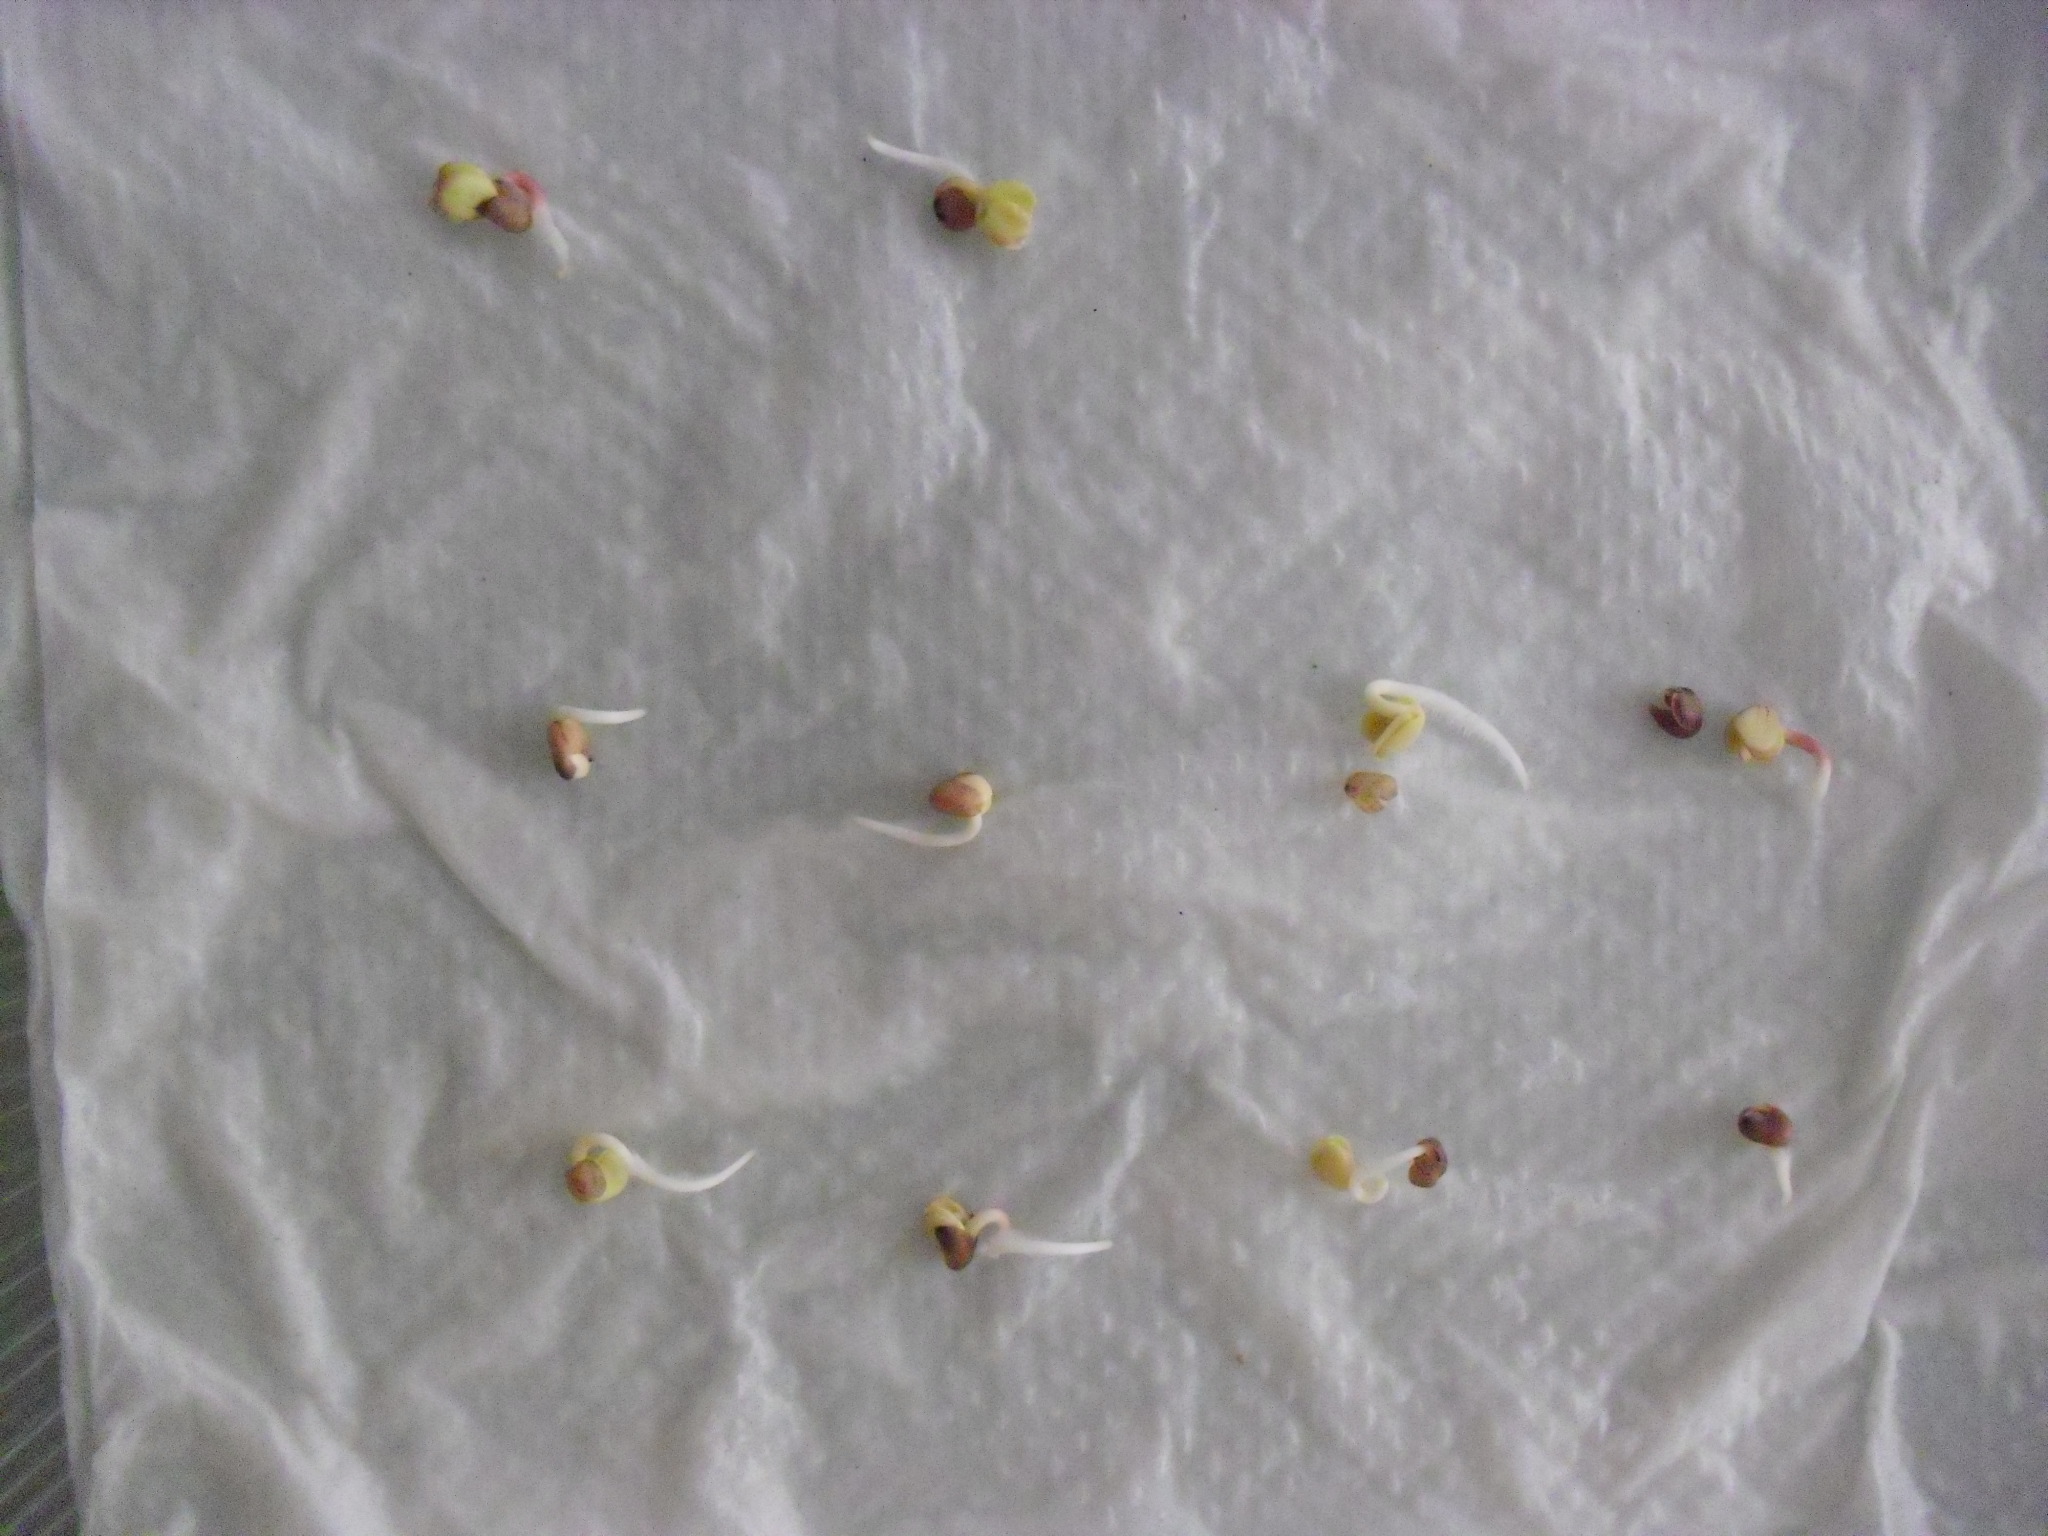 PHOTO: Ten sprouting radish seeds, each with root and seed leaves.